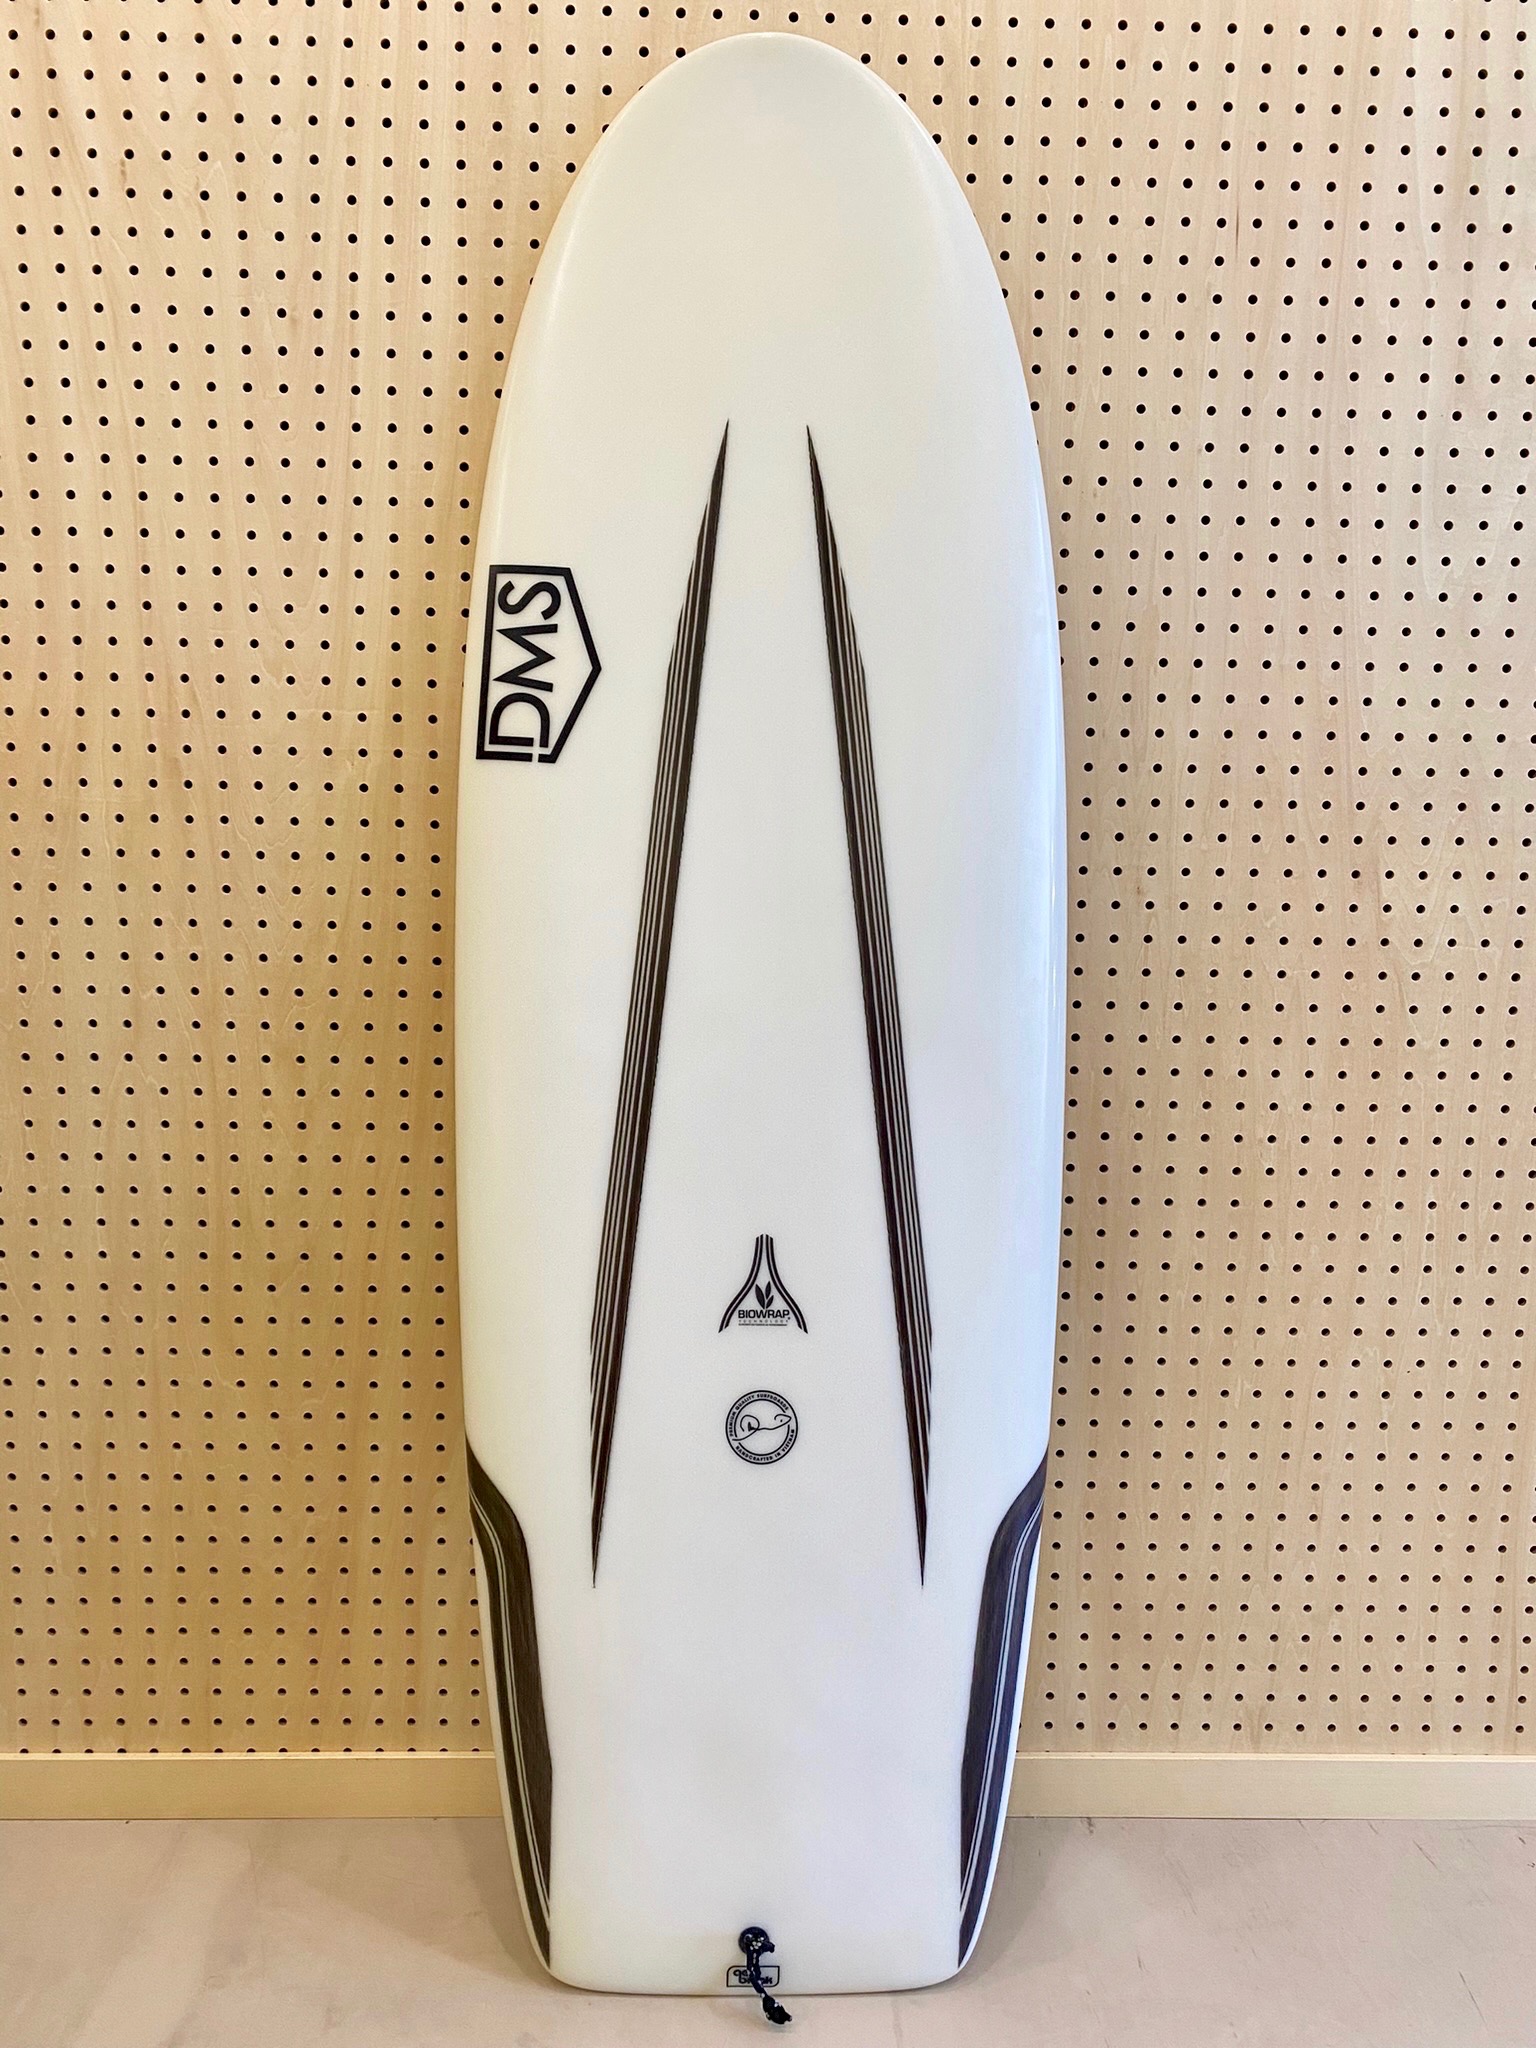 USED BOARDS (DMS Surfboards Valium 5.2)|site_title